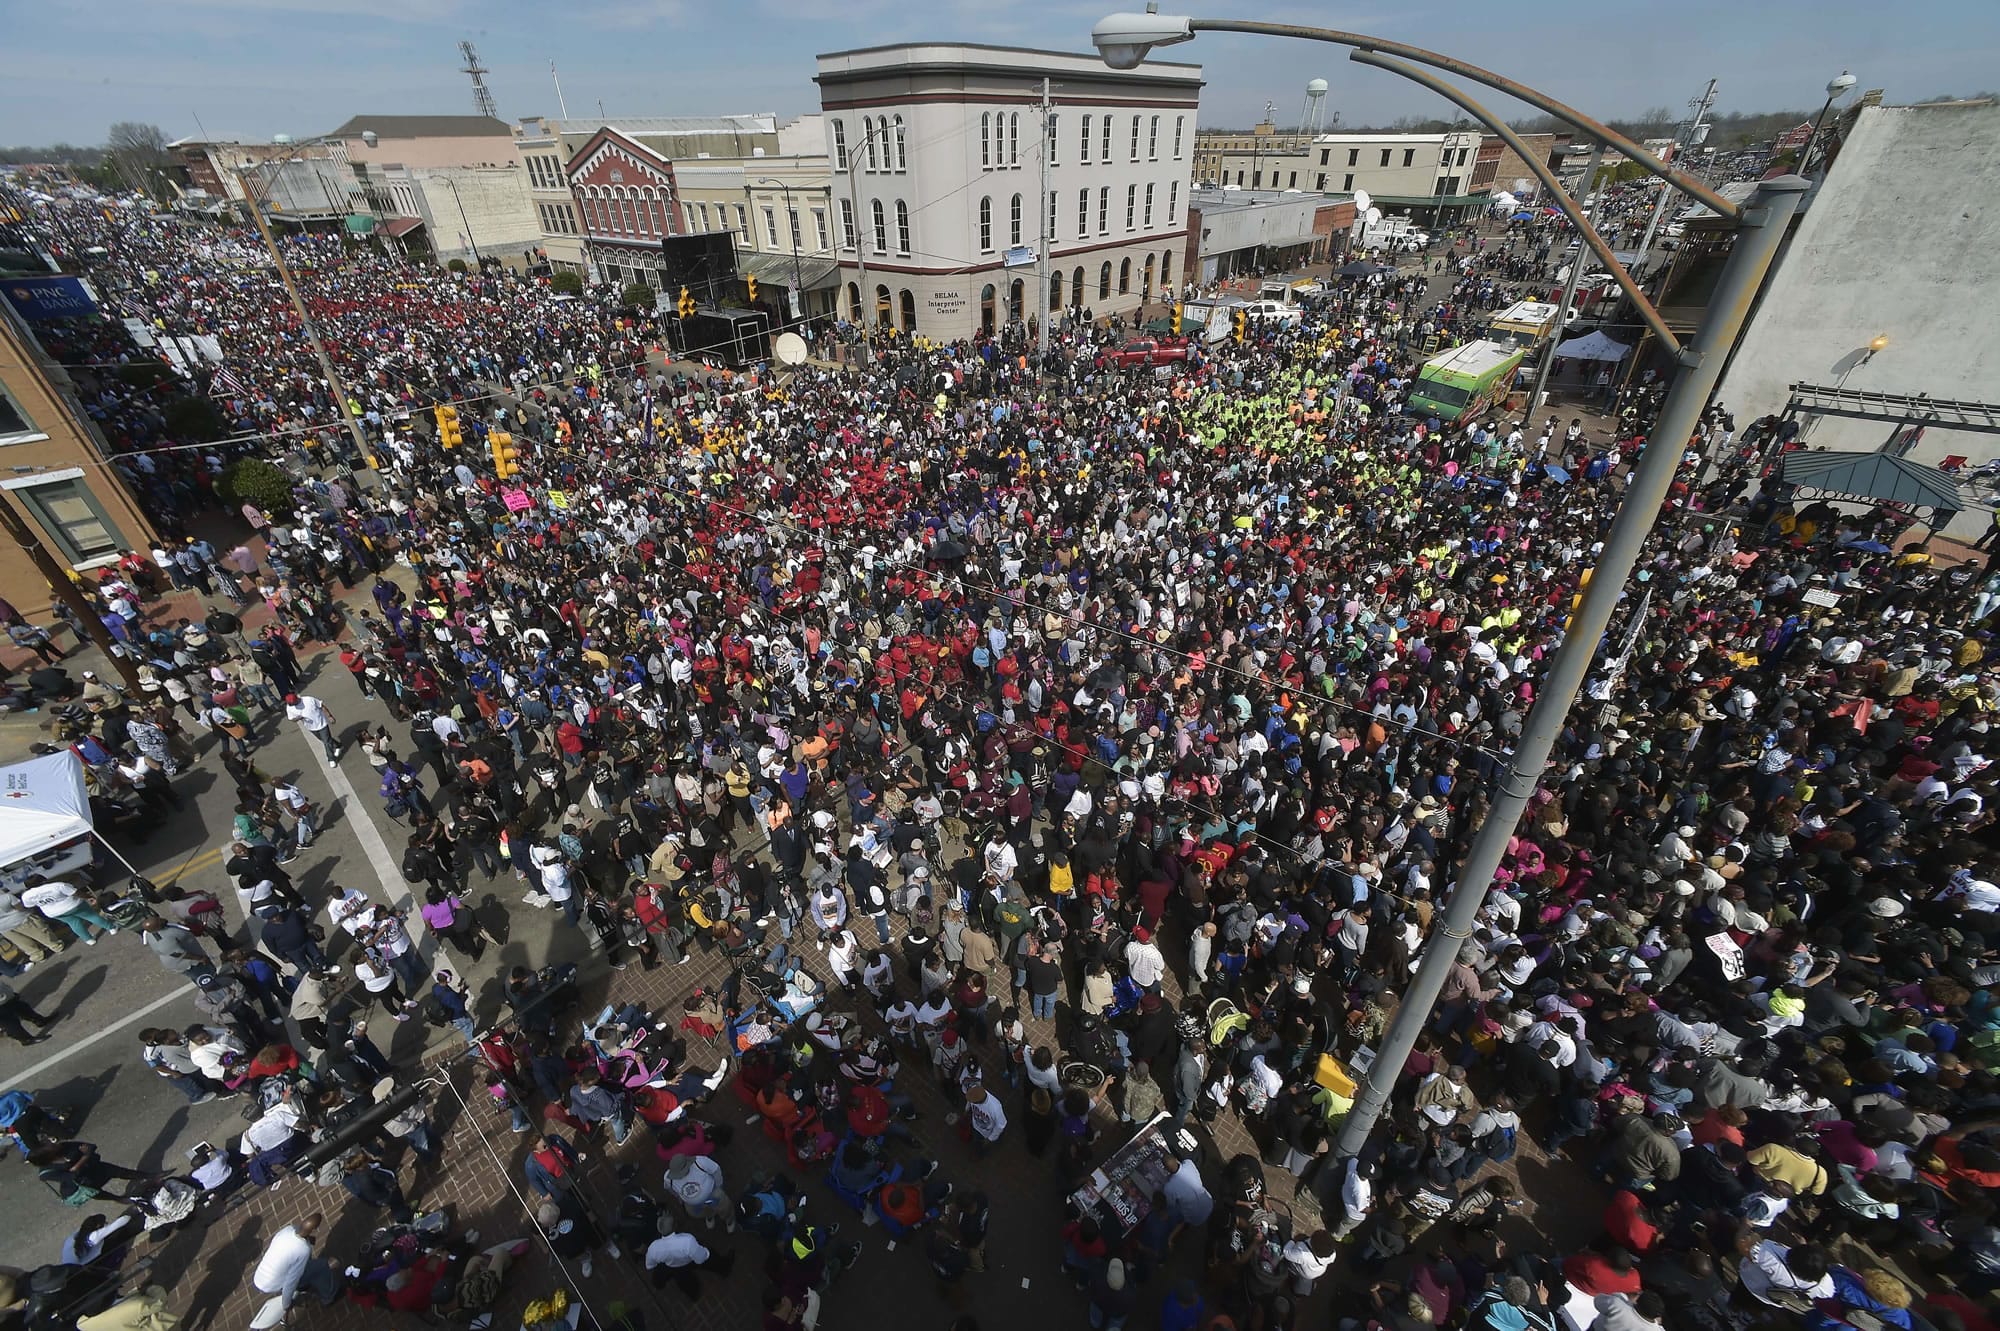 FILE- In this March 8, 2015, file photo, crowds gather before a symbolic walk across the Edmund Pettus Bridge in Selma, Ala. Organizers of the annual civil rights celebration and organizers of a Civil War battle re-enactment are upset the city is asking them to pay tens of thousands of dollars to cover the costs of police and fire protection and cleanup.